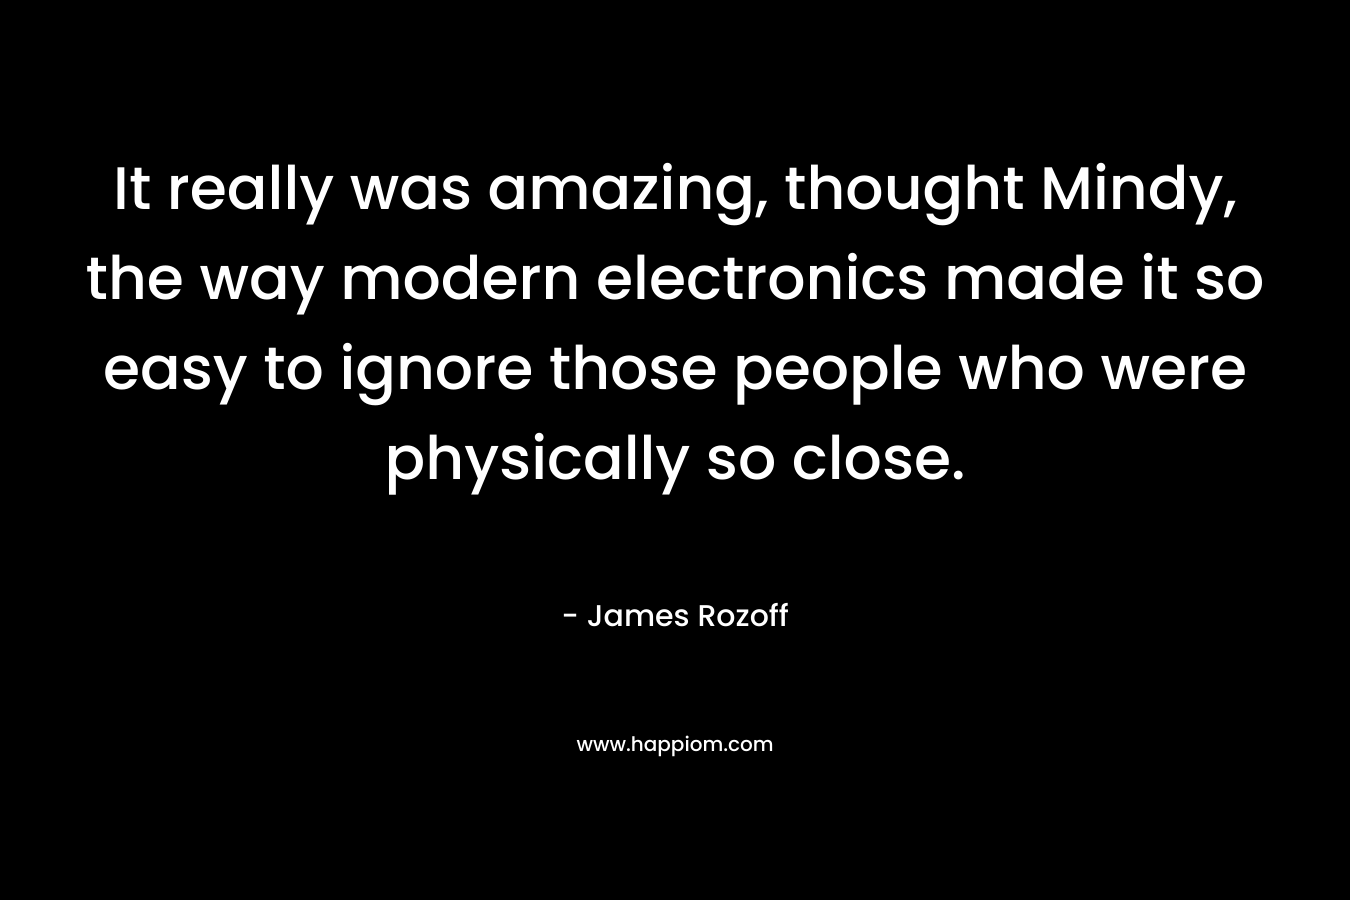 It really was amazing, thought Mindy, the way modern electronics made it so easy to ignore those people who were physically so close. – James Rozoff